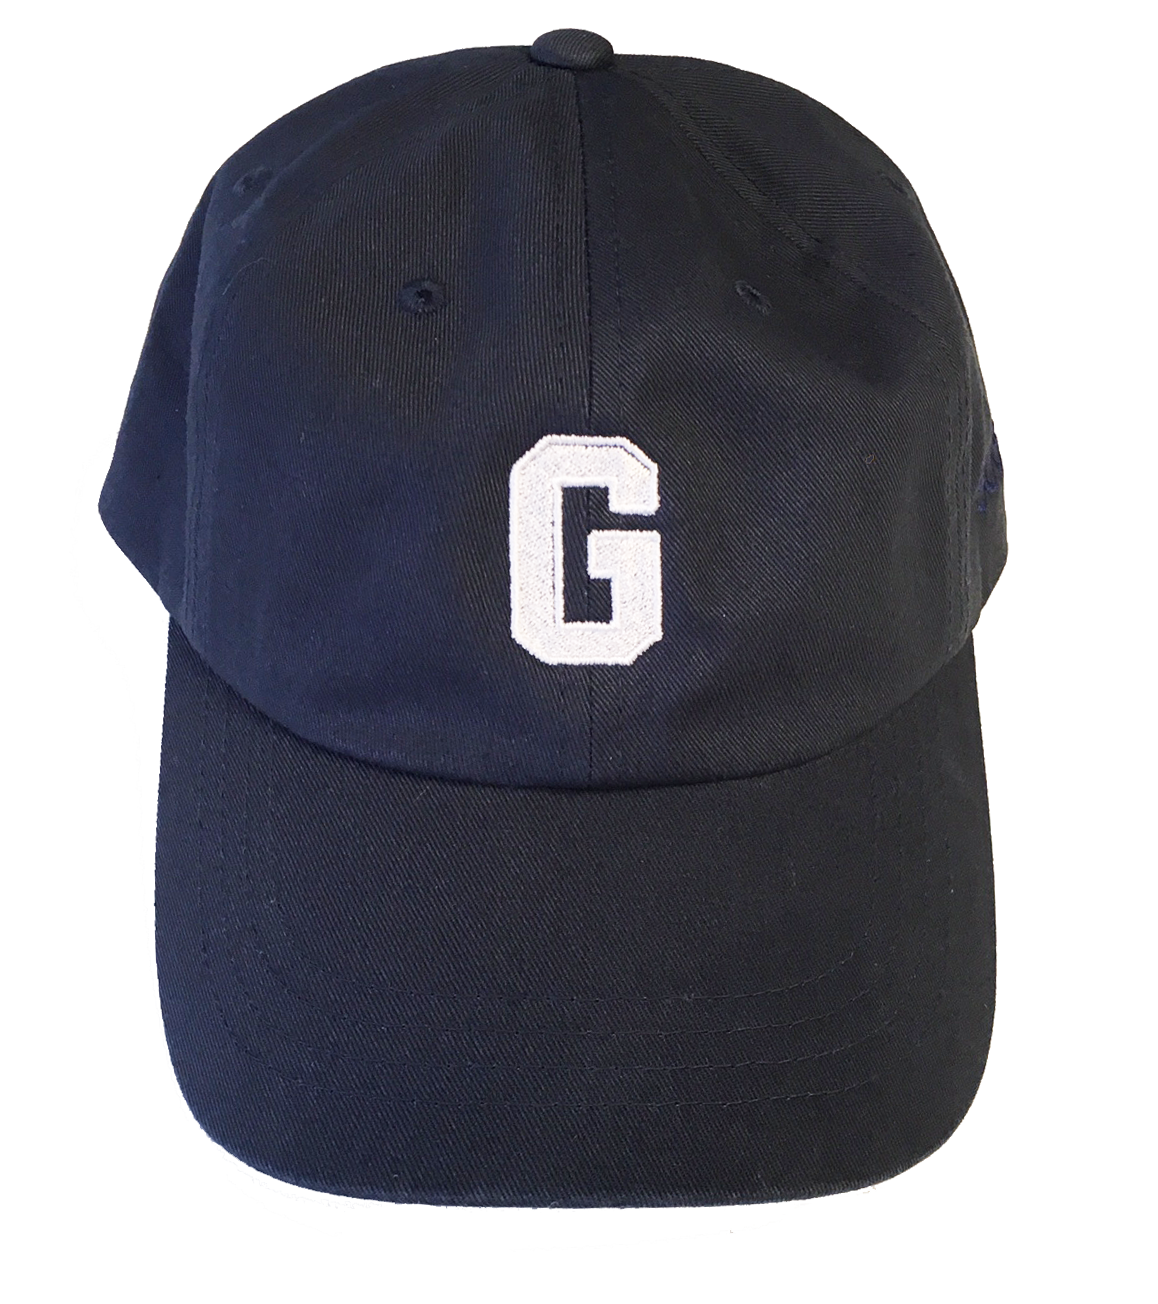 homestead_grays_hat_front_1024x1024@2x.png